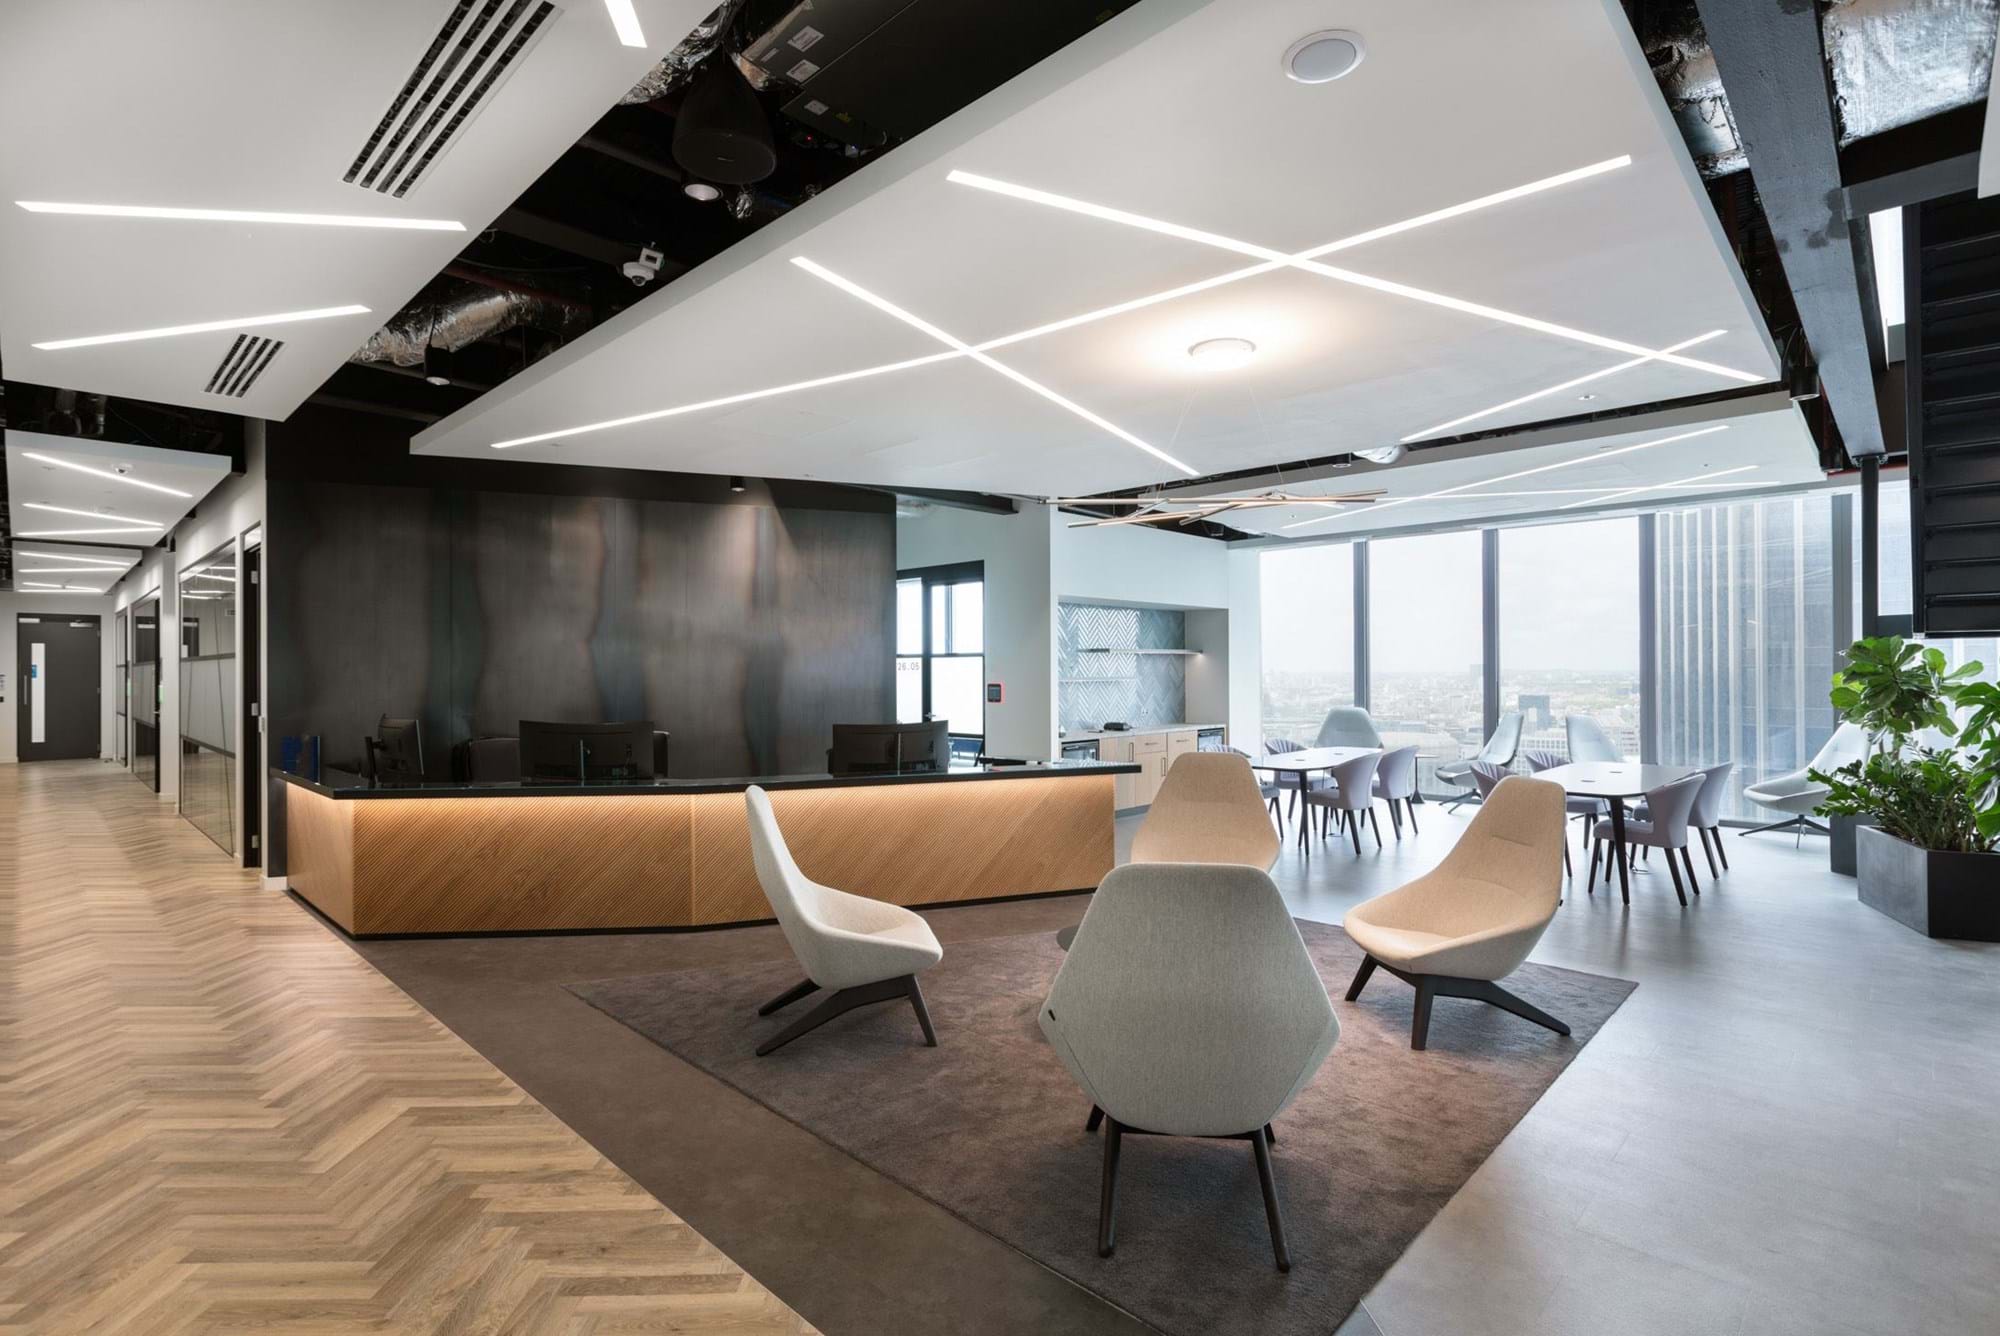 Modus Workspace office design, fit out and refurbishment - Insurance and Risk Management Firm - Modus_Verisk-22.jpg